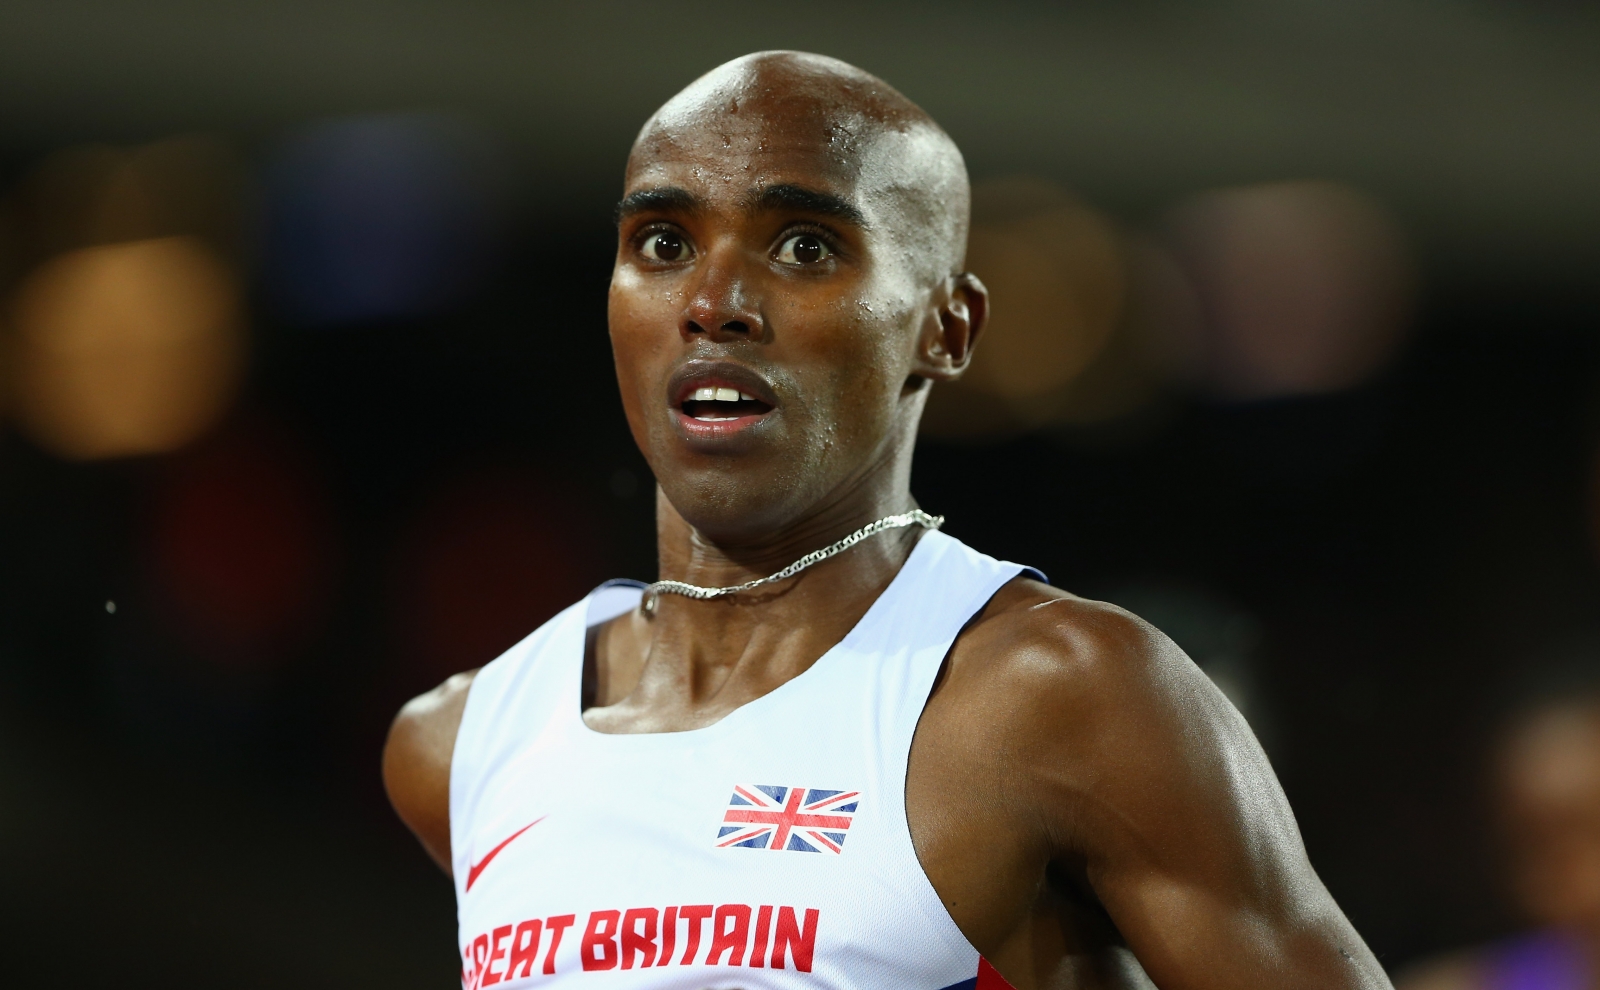 UK Athletics clears Mo Farah to work with Alberto Salazar after doping